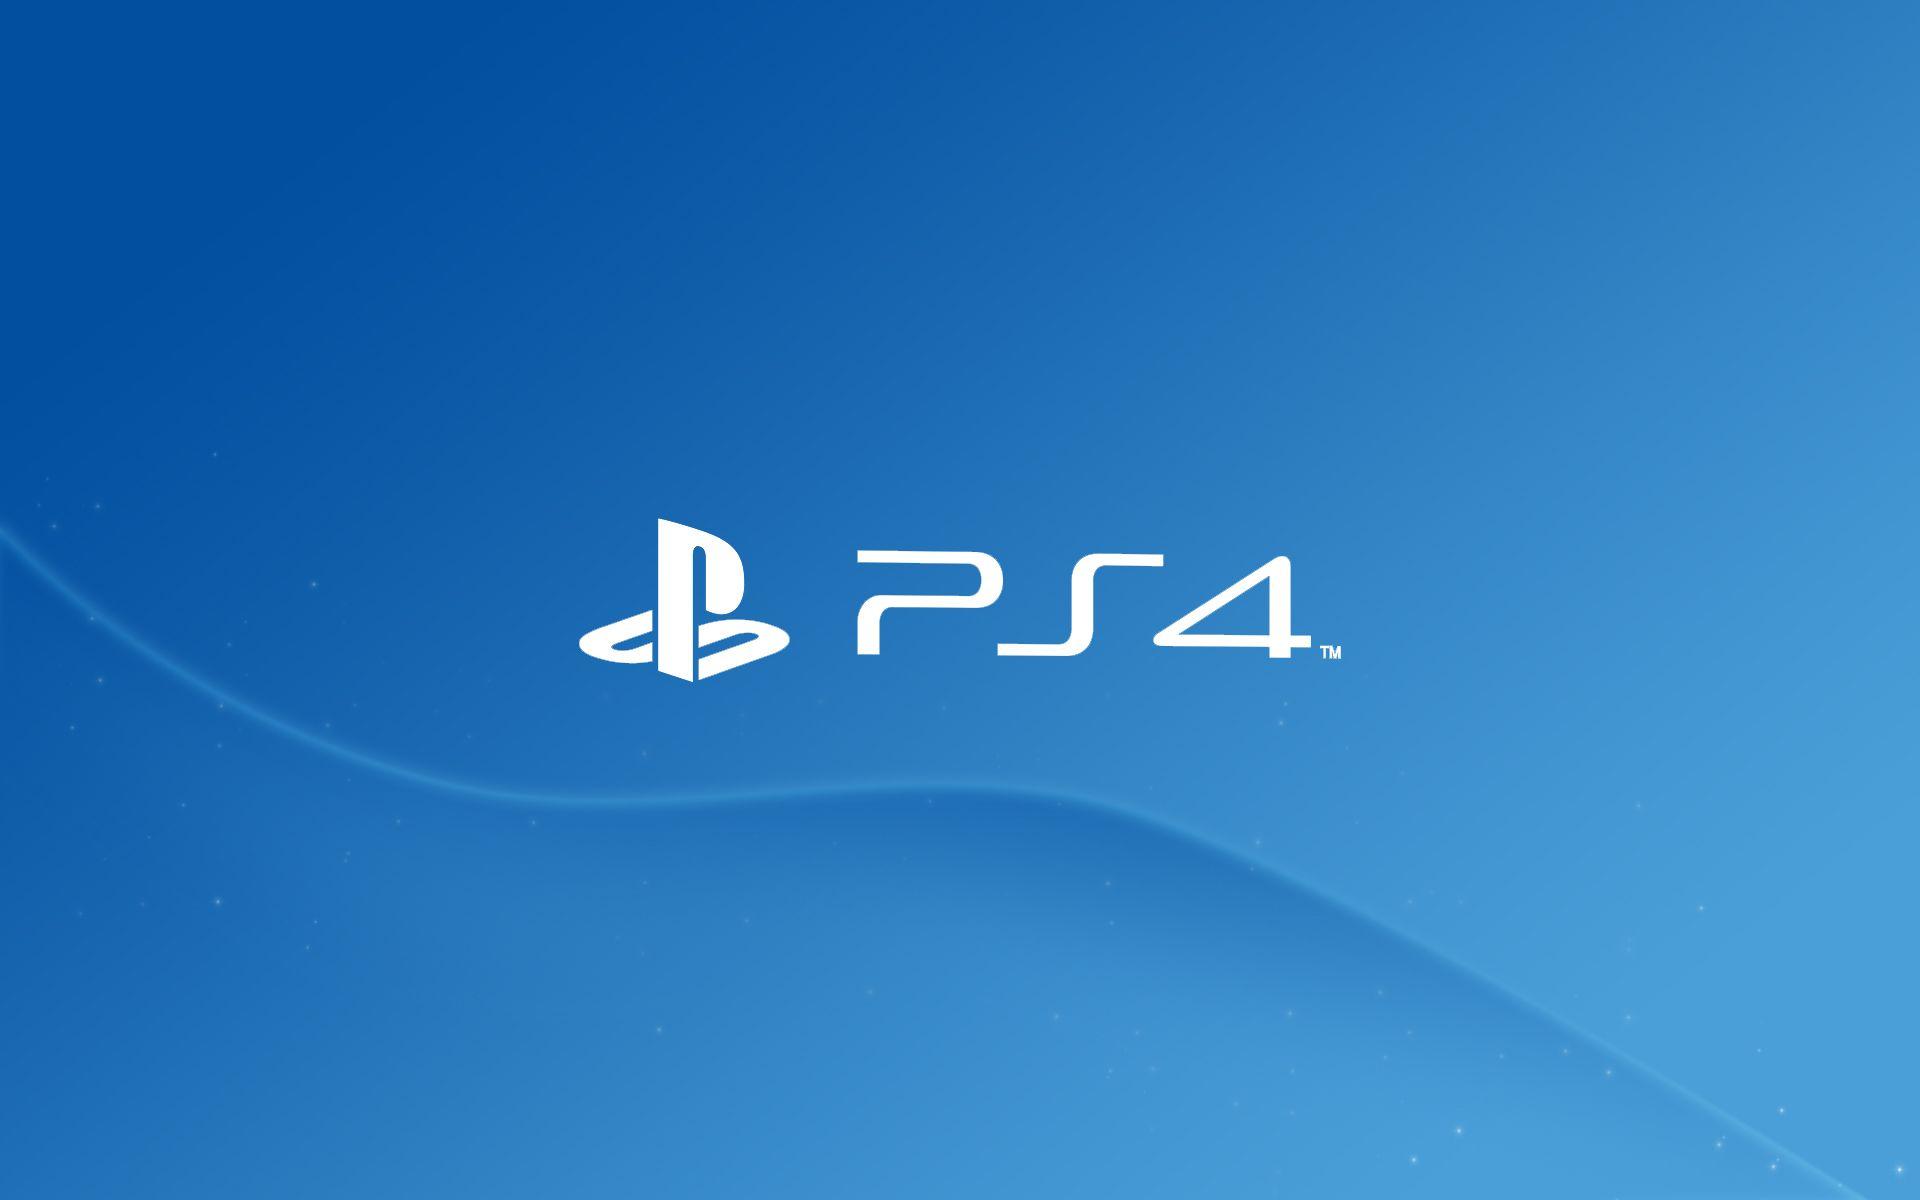 Fonds d&Playstation 4 : tous les wallpapers Playstation 4